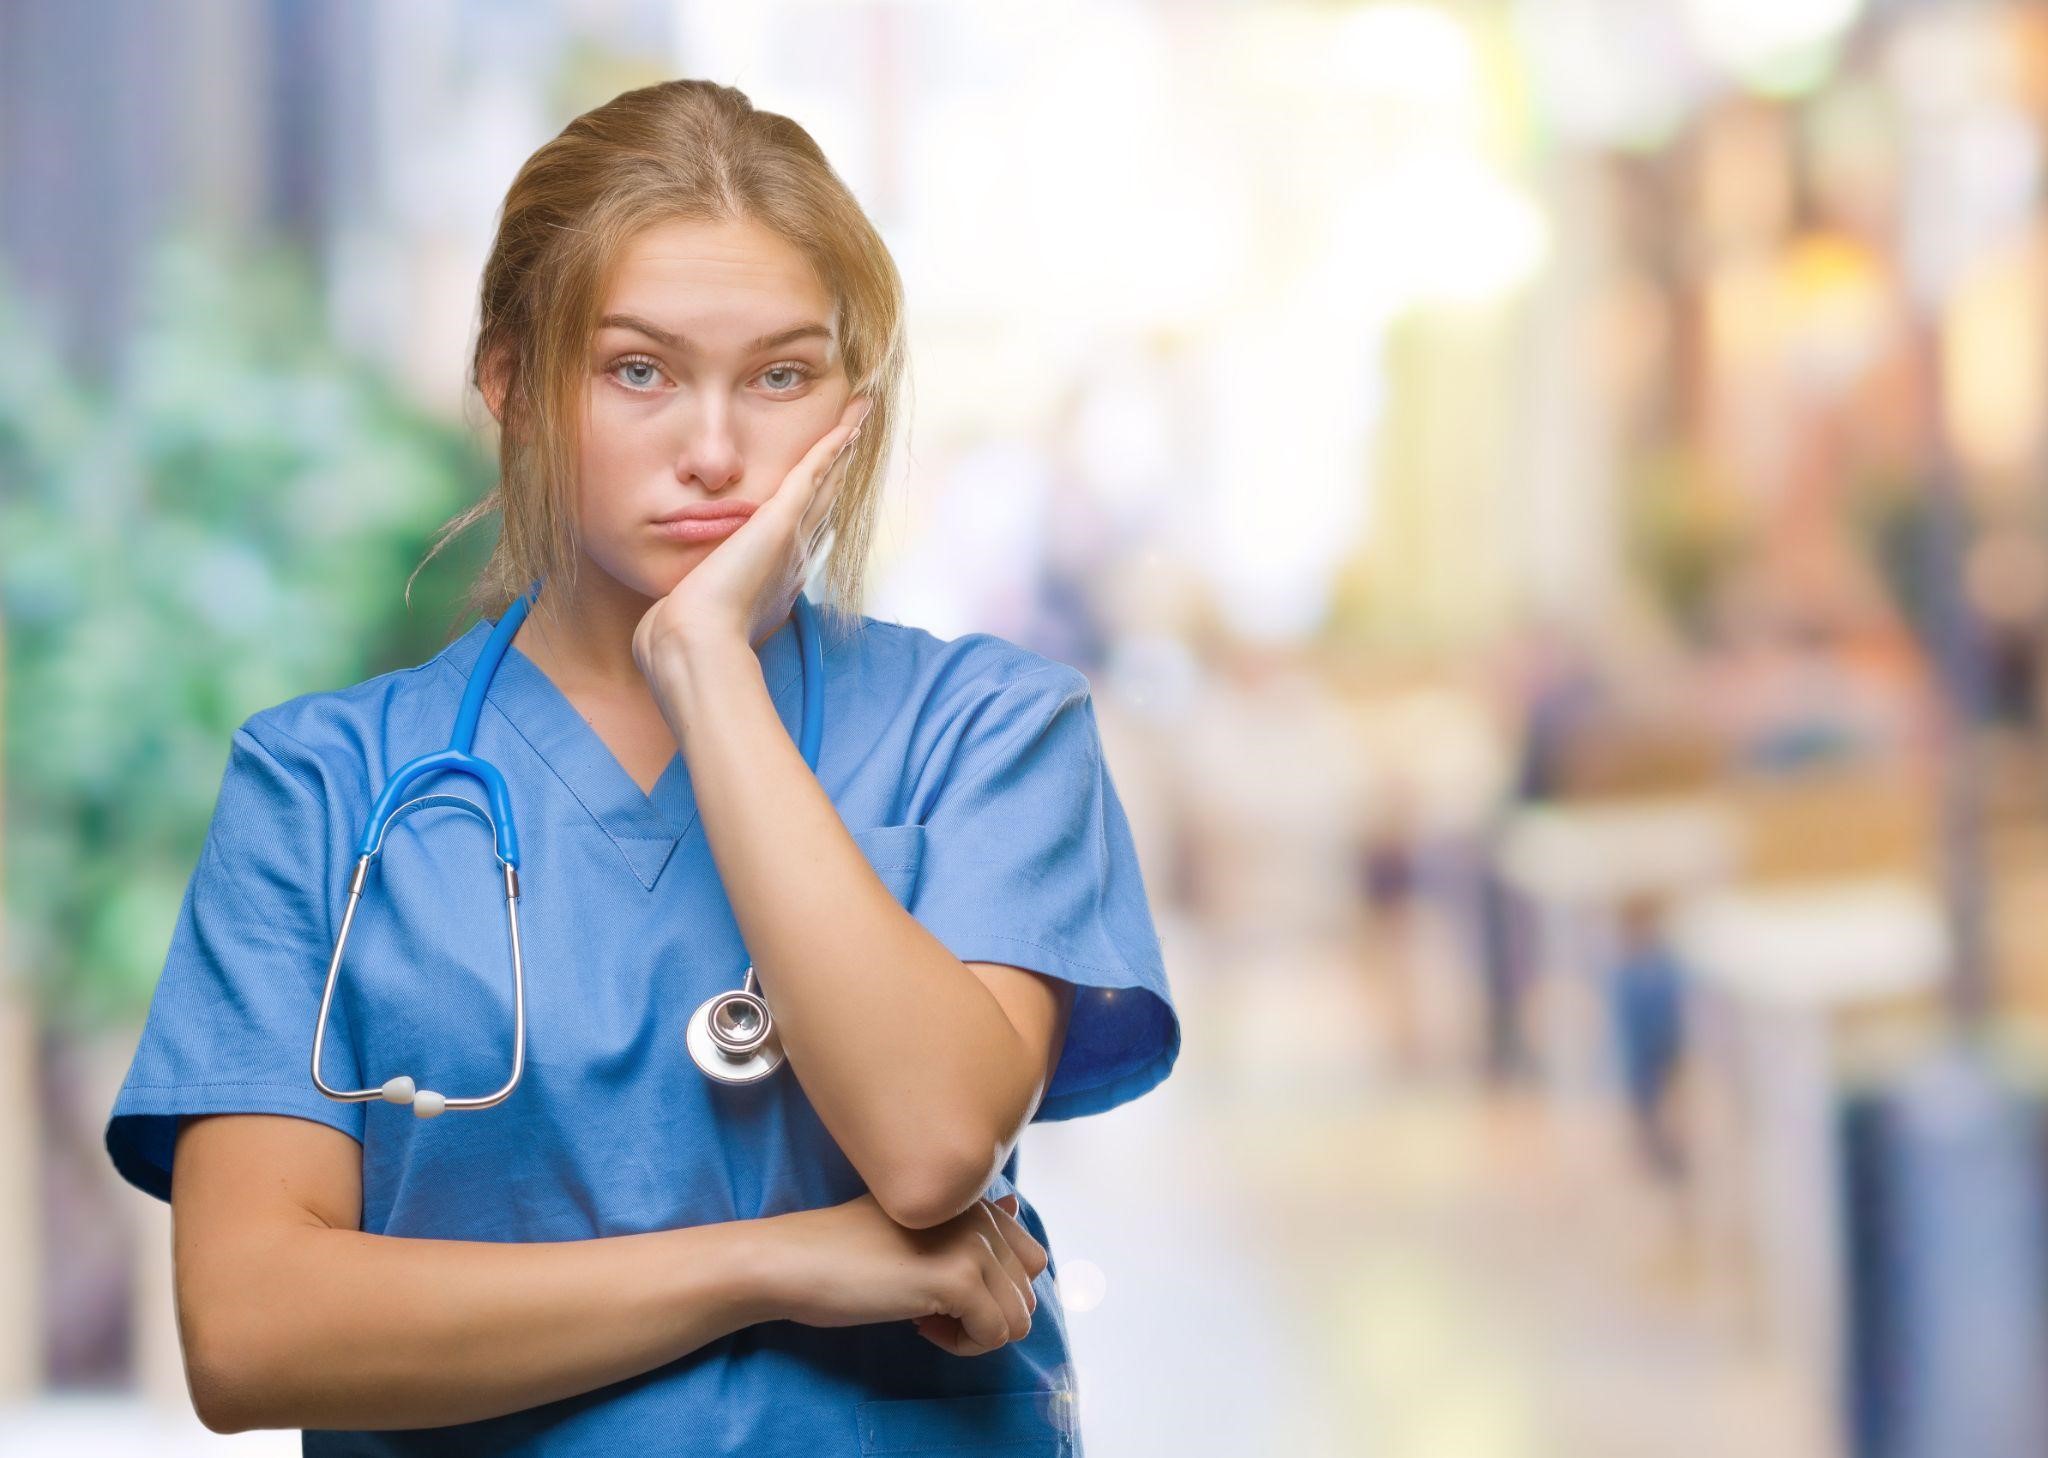 Overcoming Stress as a Healthcare Professional